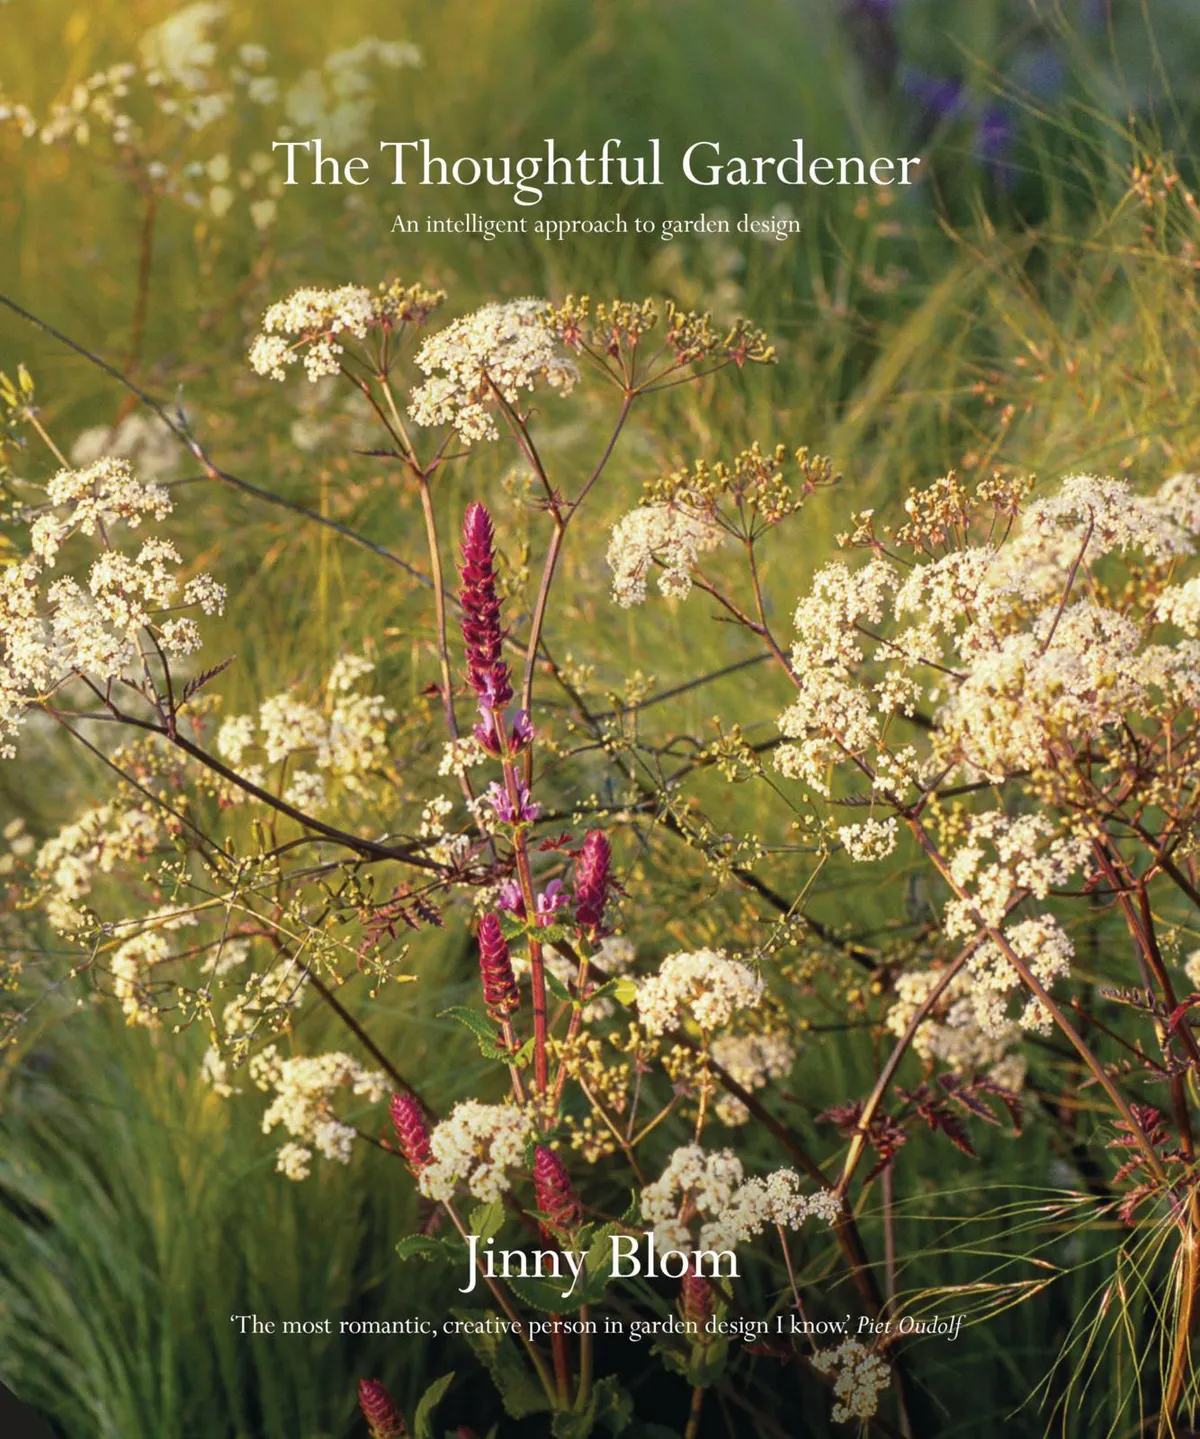 Front cover of the book 'The Thoughtful Gardener' by Jinny Blom